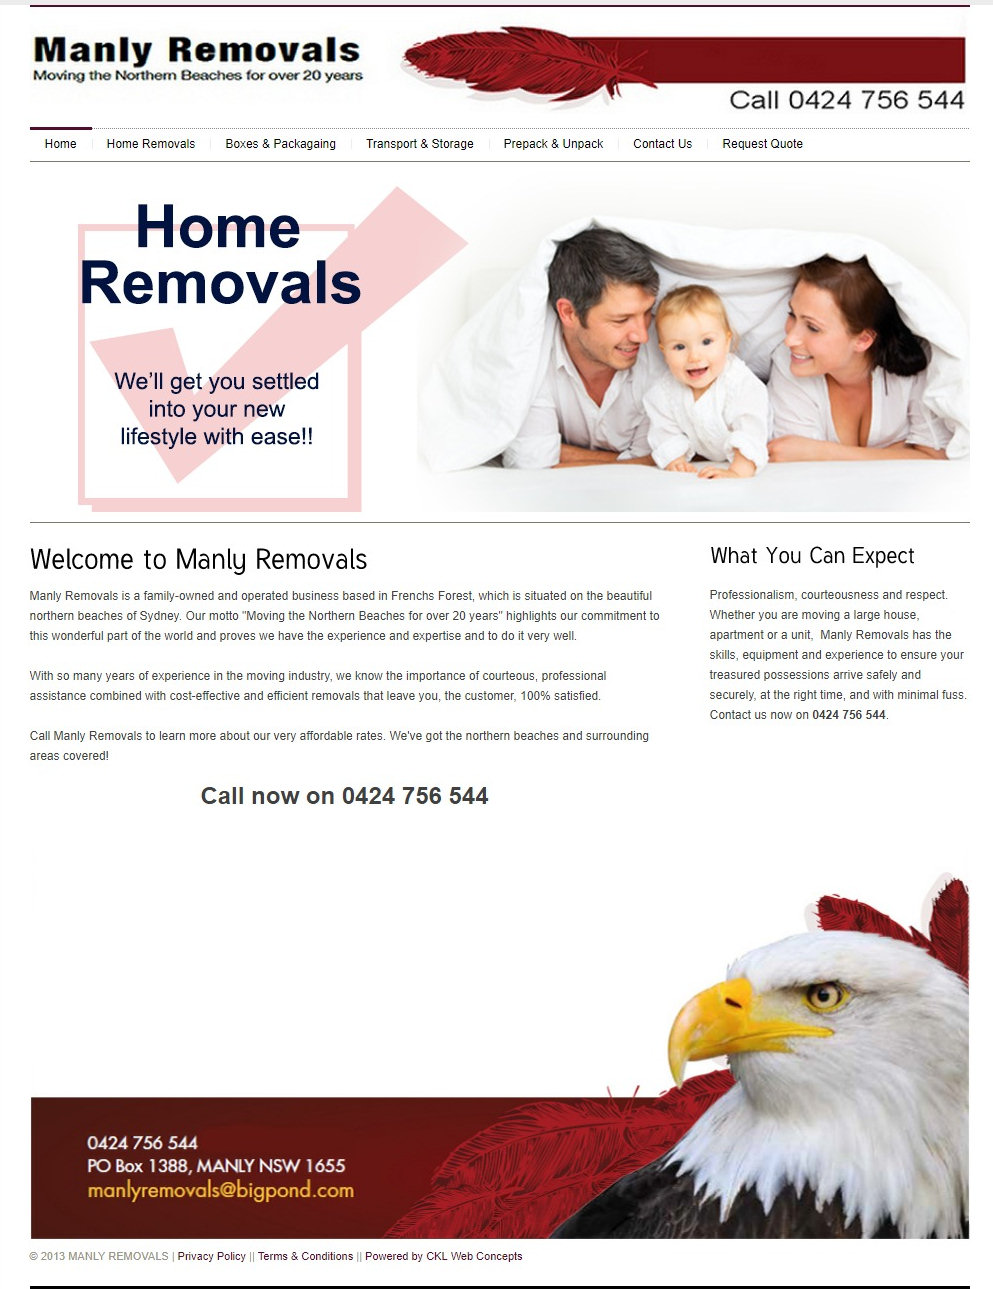 Manly Removals development by CKL Web Concepts